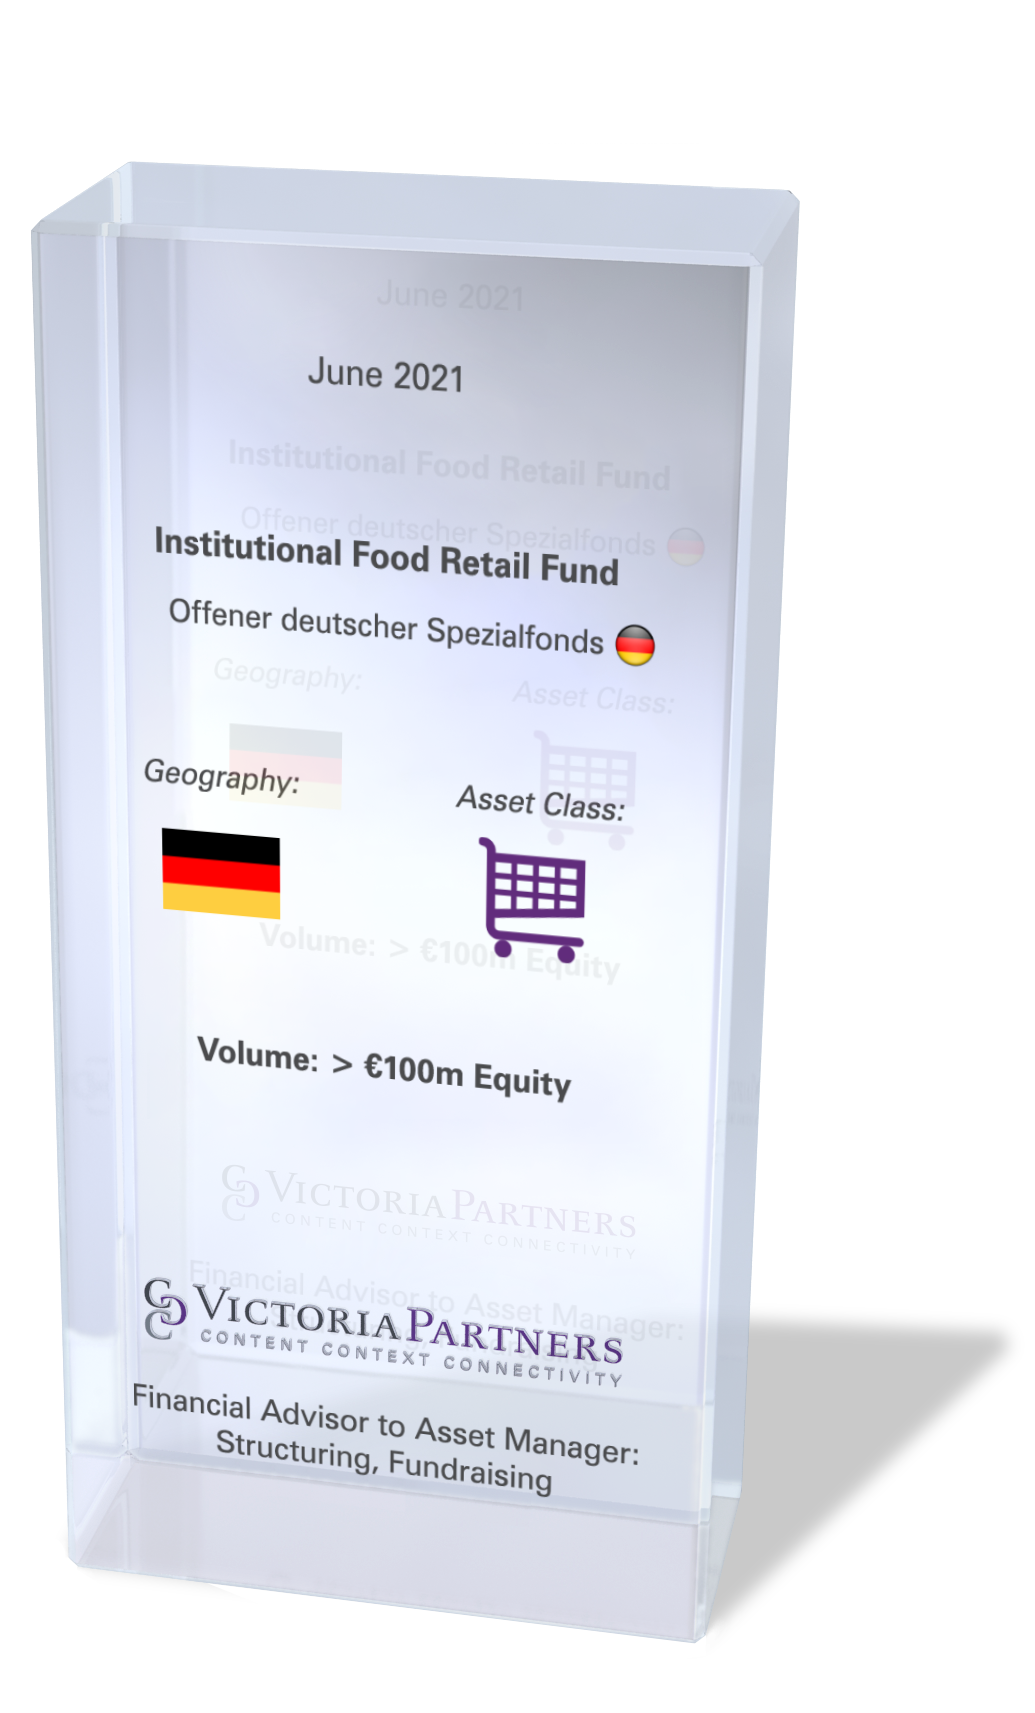 VICTORIAPARTNERS - Financial Advisor to Asset Manager: Structuring, Fundraising in Deutschland - June 2021